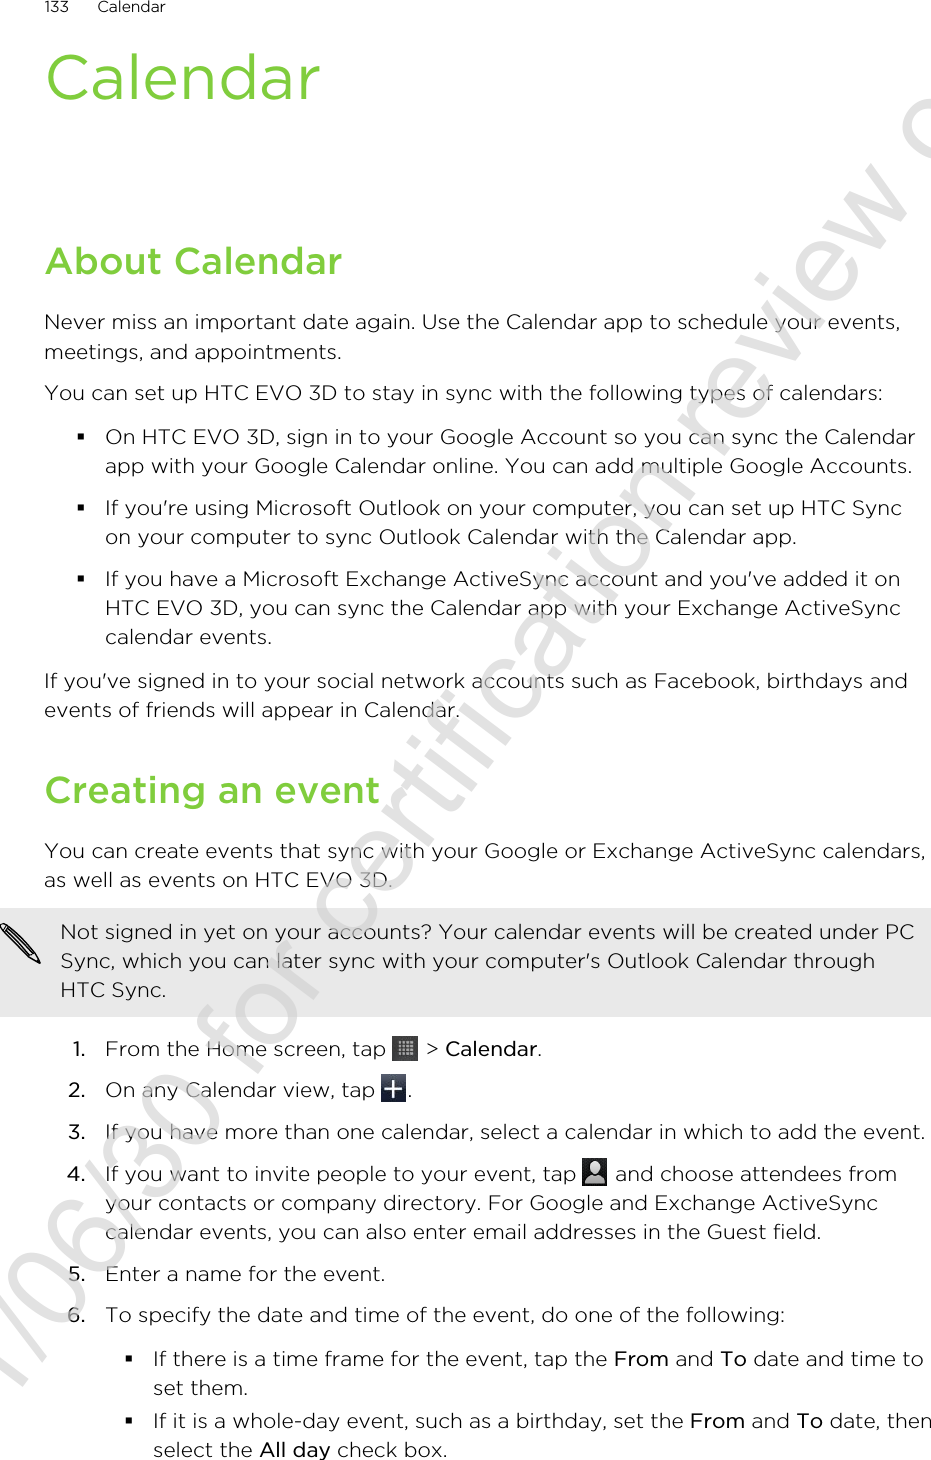 CalendarAbout CalendarNever miss an important date again. Use the Calendar app to schedule your events,meetings, and appointments.You can set up HTC EVO 3D to stay in sync with the following types of calendars:§On HTC EVO 3D, sign in to your Google Account so you can sync the Calendarapp with your Google Calendar online. You can add multiple Google Accounts.§If you&apos;re using Microsoft Outlook on your computer, you can set up HTC Syncon your computer to sync Outlook Calendar with the Calendar app.§If you have a Microsoft Exchange ActiveSync account and you&apos;ve added it onHTC EVO 3D, you can sync the Calendar app with your Exchange ActiveSynccalendar events.If you&apos;ve signed in to your social network accounts such as Facebook, birthdays andevents of friends will appear in Calendar.Creating an eventYou can create events that sync with your Google or Exchange ActiveSync calendars,as well as events on HTC EVO 3D.Not signed in yet on your accounts? Your calendar events will be created under PCSync, which you can later sync with your computer&apos;s Outlook Calendar throughHTC Sync.1. From the Home screen, tap   &gt; Calendar.2. On any Calendar view, tap  .3. If you have more than one calendar, select a calendar in which to add the event.4. If you want to invite people to your event, tap   and choose attendees fromyour contacts or company directory. For Google and Exchange ActiveSynccalendar events, you can also enter email addresses in the Guest field.5. Enter a name for the event.6. To specify the date and time of the event, do one of the following:§If there is a time frame for the event, tap the From and To date and time toset them.§If it is a whole-day event, such as a birthday, set the From and To date, thenselect the All day check box.133 Calendar2011/06/30 for certification review only